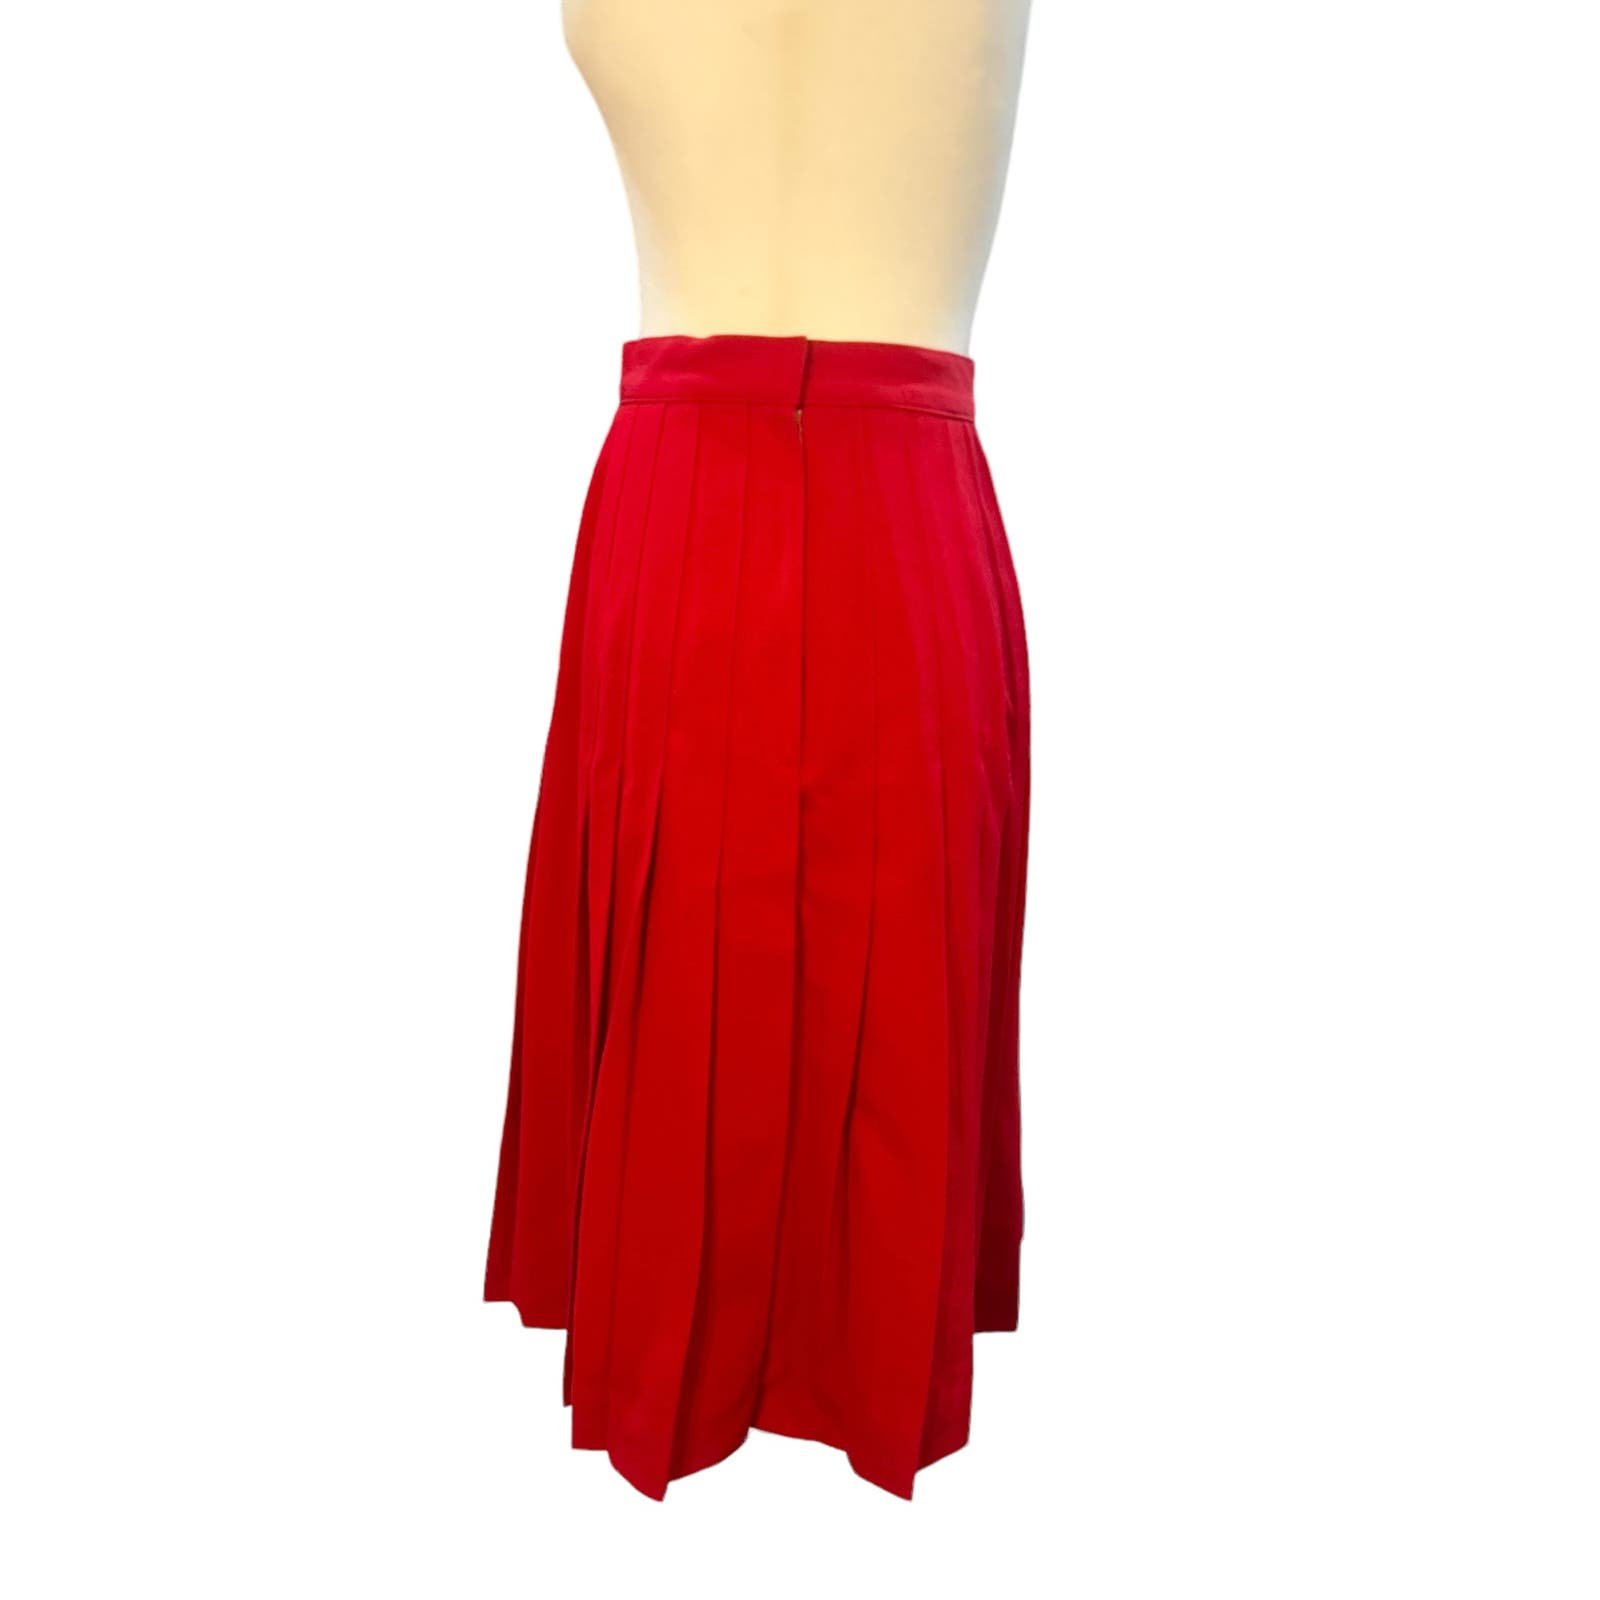 Classic VINTAGE Austin Reed Pleated Wool Red Midi Skirt Size 4 oe3x2UOdc Outlet Store